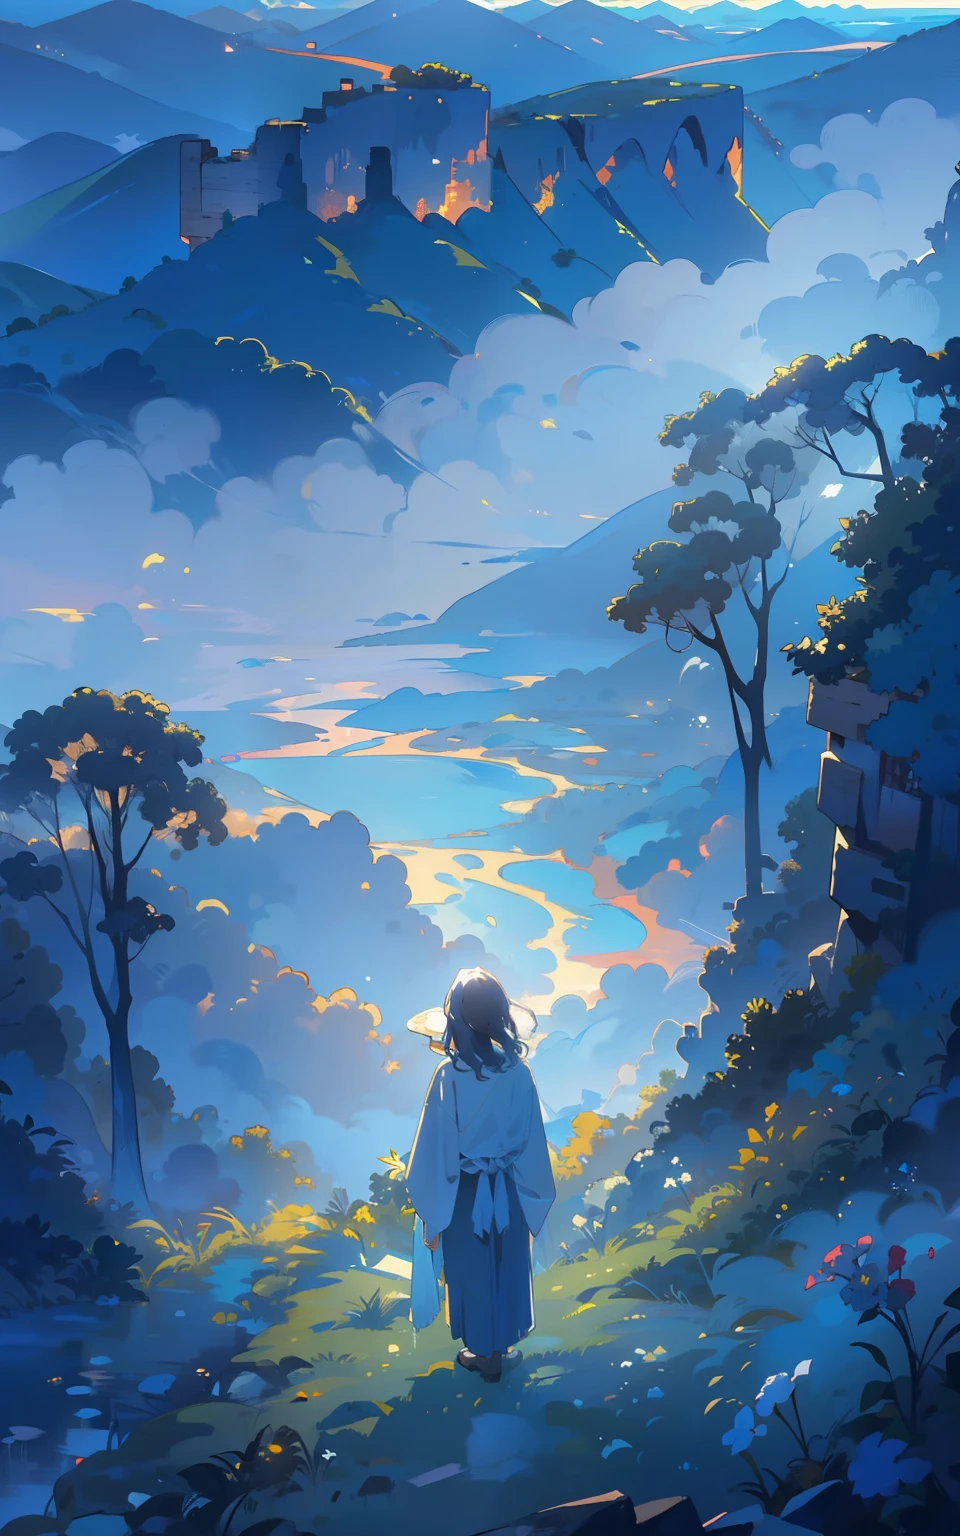 (Blue mountains:Women stand between magnificent mountains，The mountains are shrouded in a soft blue mist，She gazes at the magnificence of nature，full of awe and admiration。)